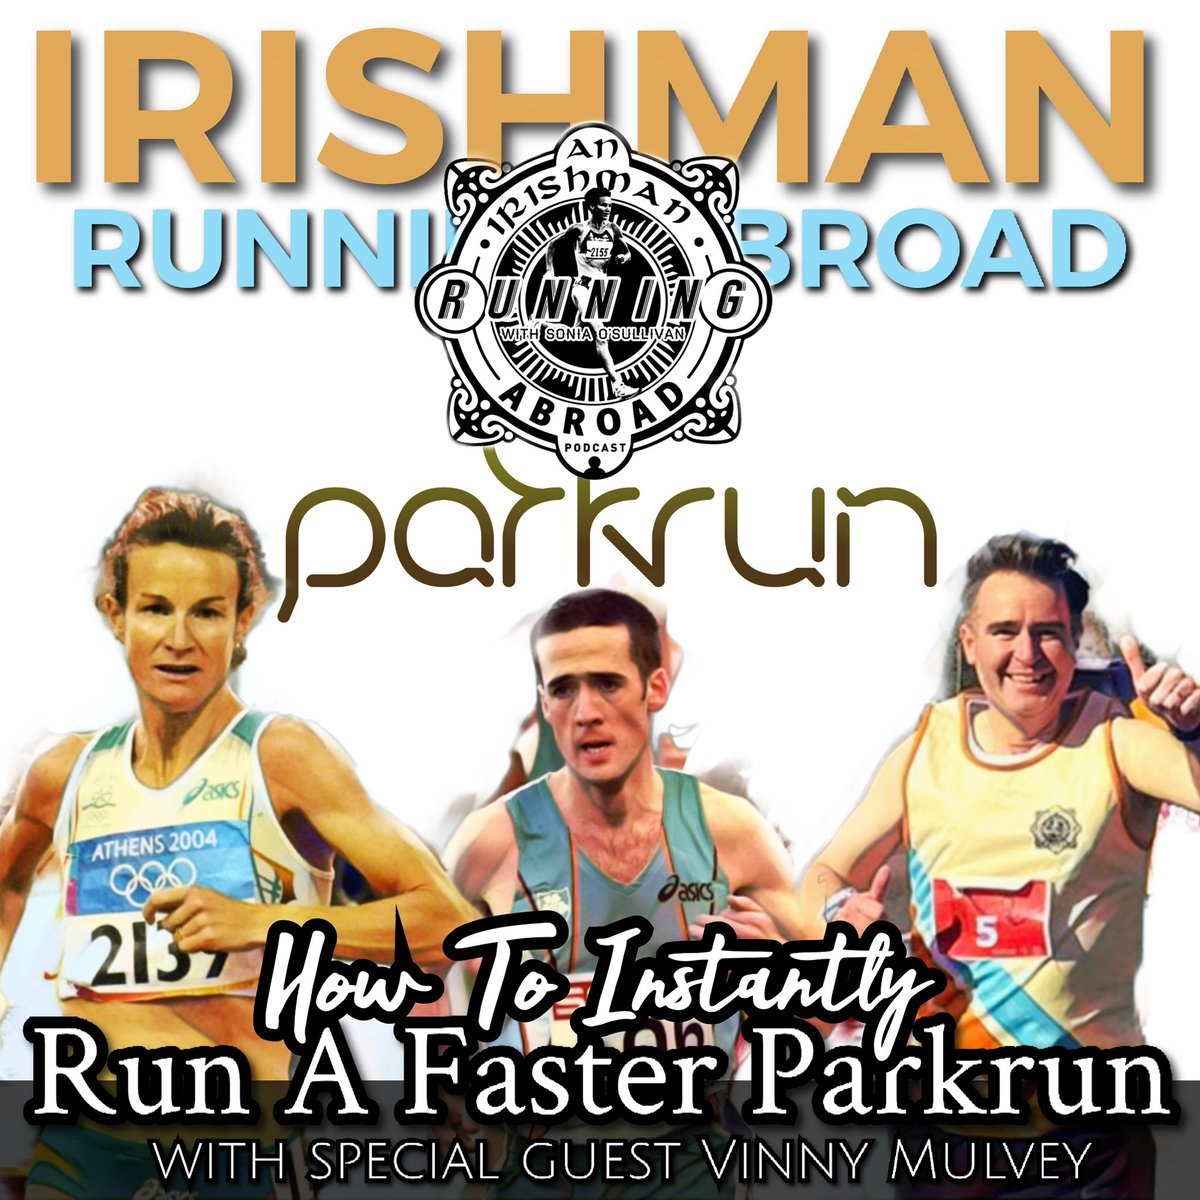 Your fastest Parkrun isn’t something you should chase every week for lots of reasons. Fancy seeing how fast you can go? Sonia is here to help! Her 5 tips will instantly take minutes off your best time. Hear them all today on #IrishmanRunningAbroad (special guest Vinny Mulvey!) 🇮🇪